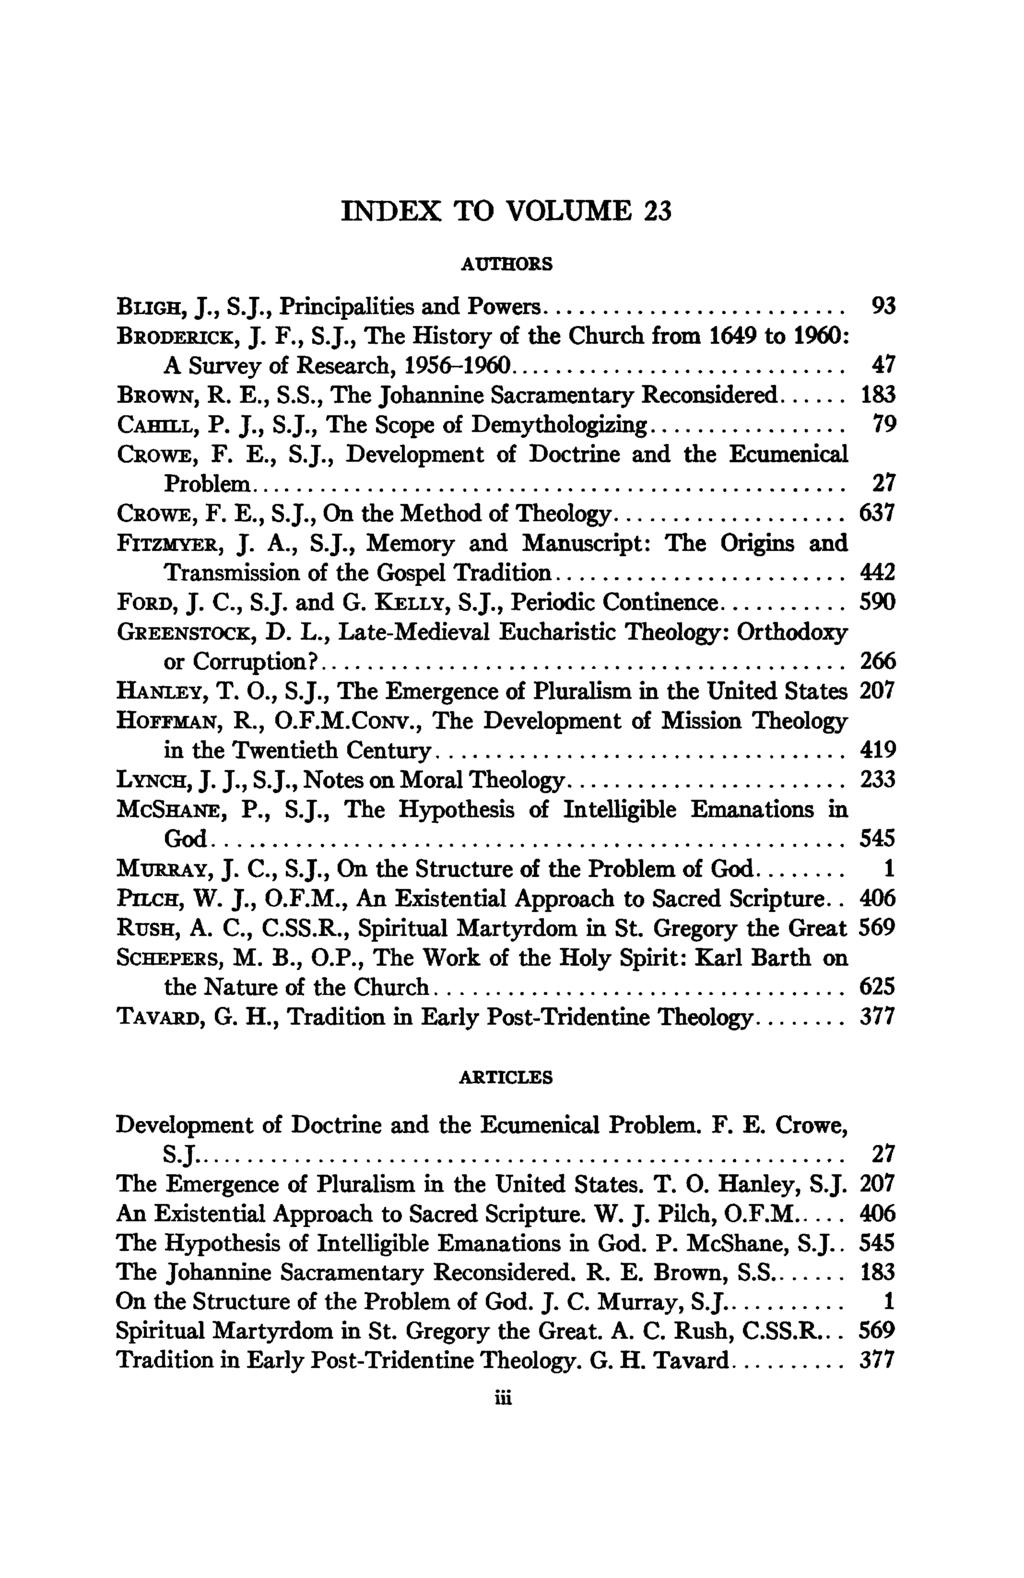 INDEX TO VOLUME 23 AUTHORS BLIGH, J., S.J., Principalities and Powers 93 BRODERICK, J. F., S.J., The History of the Church from 1649 to 1960: A Survey of Research, 1956-1960 47 BROWN, R. E., S.S., The Johannine Sacramentary Reconsidered 183 CAHILL, P.